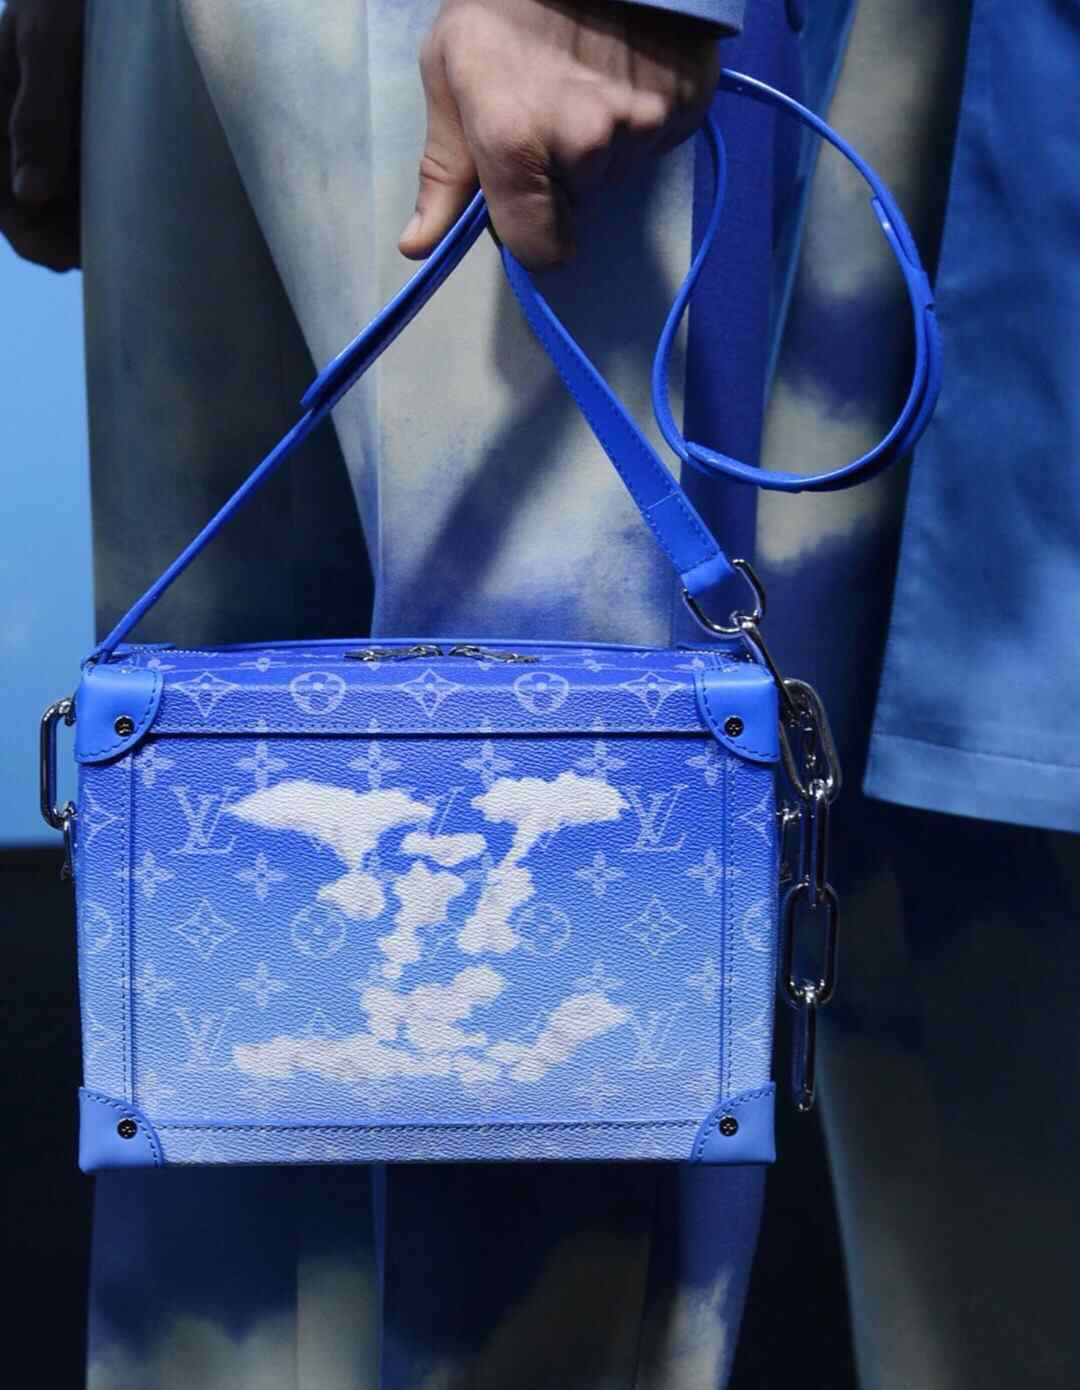 LV NEW BAGS